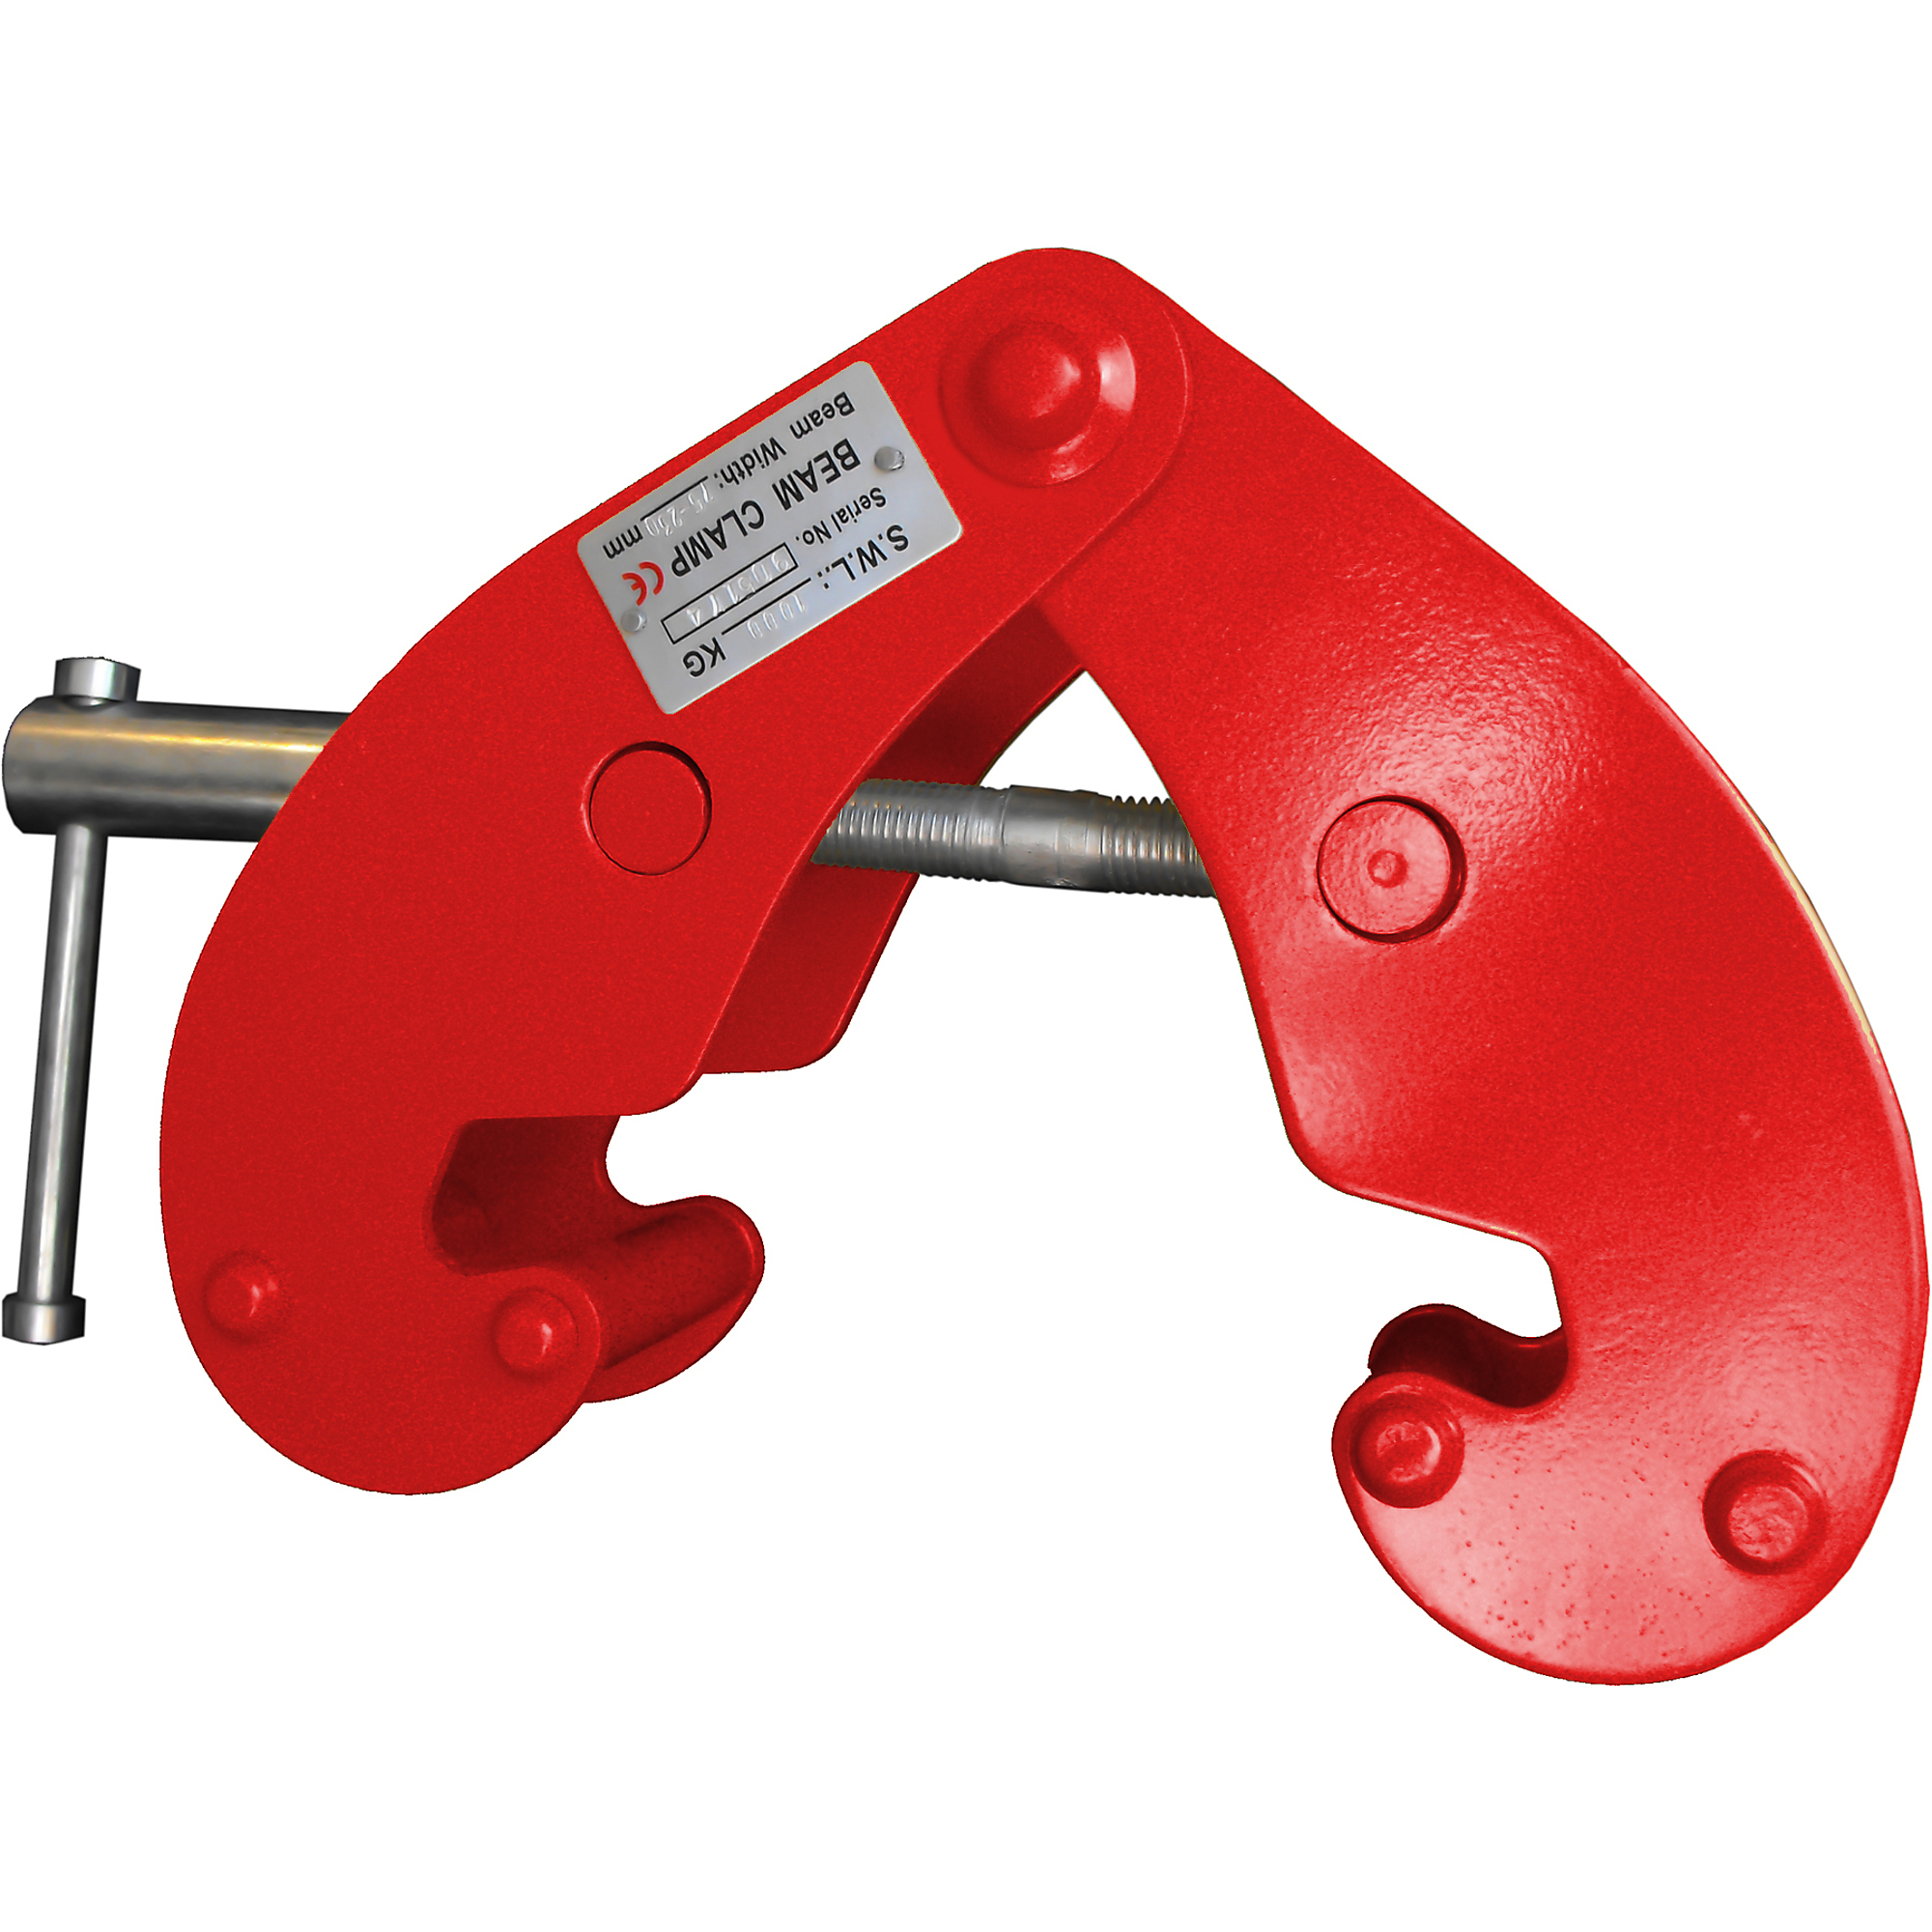 3 Ton Beam Clamp, Capacity 3 Tons, MInch Jaw Capacity 4 in, Max. Jaw Capacity 12 in, Model - American Power Pull 730